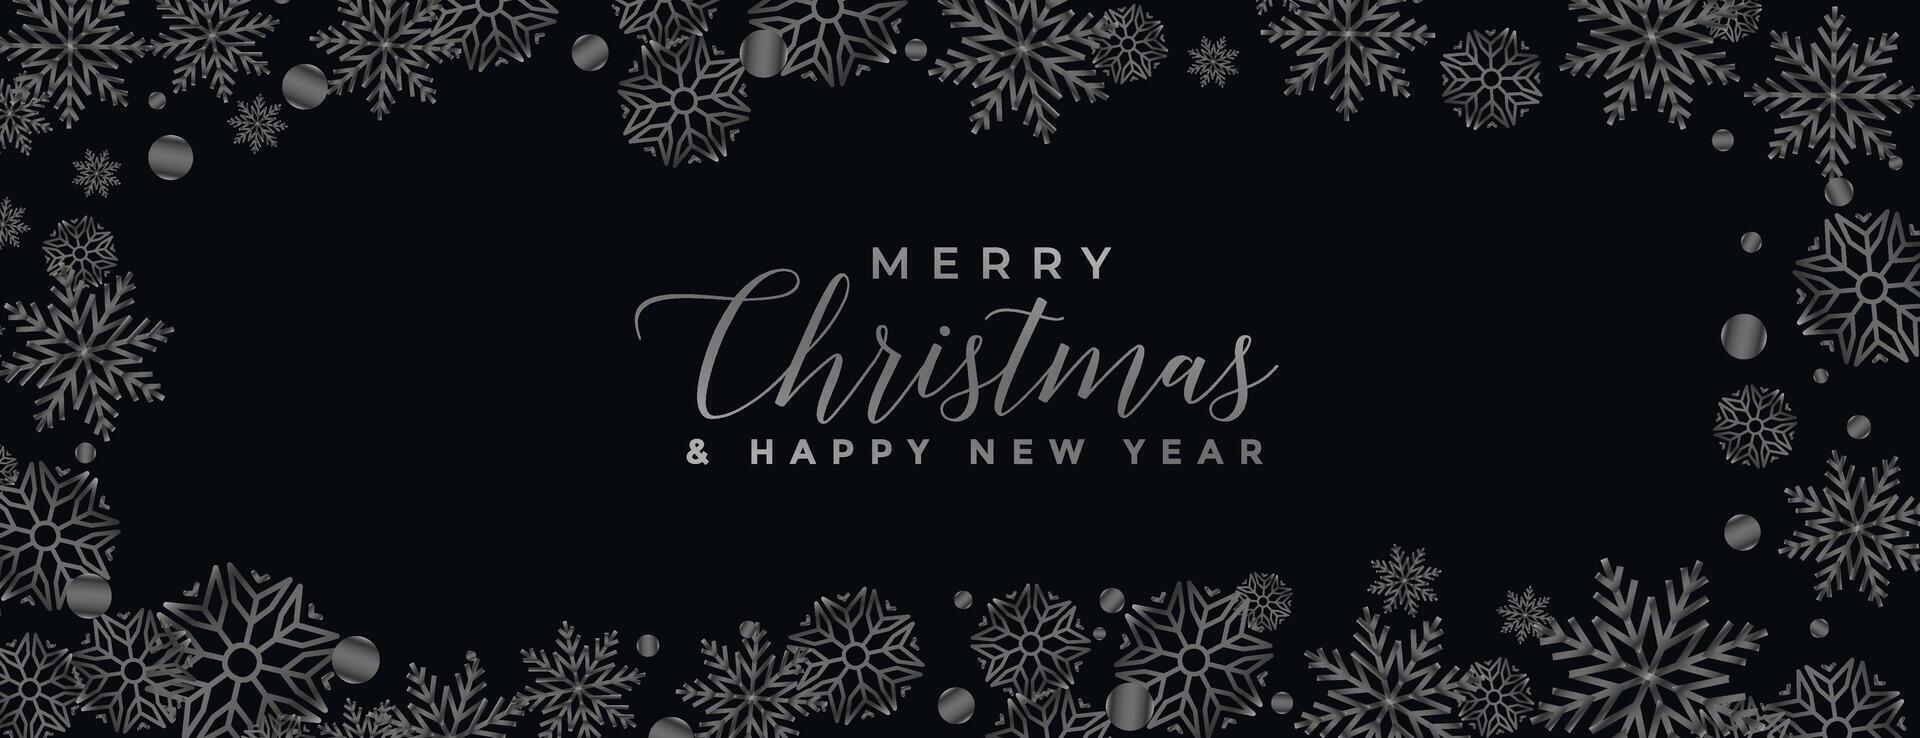 merry christmas black background with snowflakes border vector